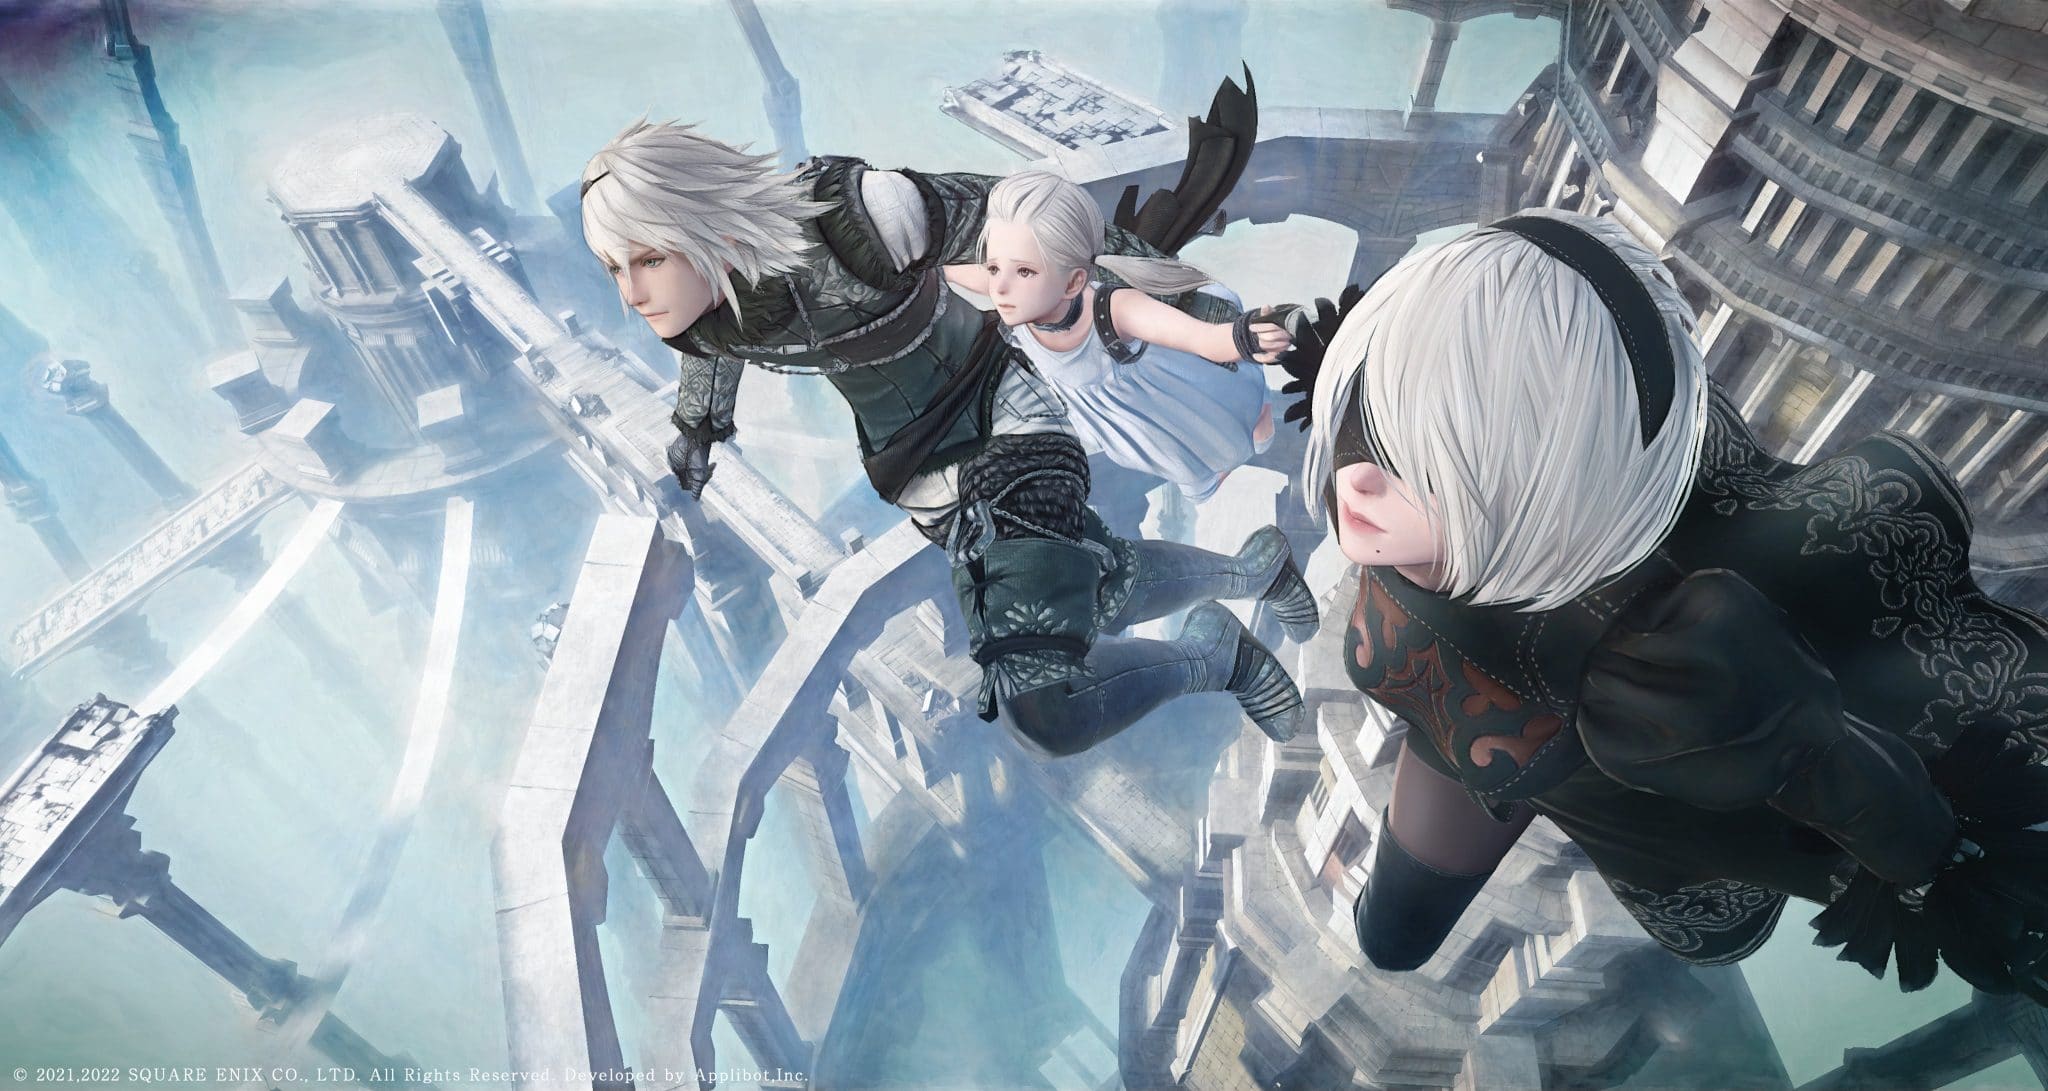 SQUARE ENIX  The Official SQUARE ENIX Website - NieR Re[in]carnation -  Available Now